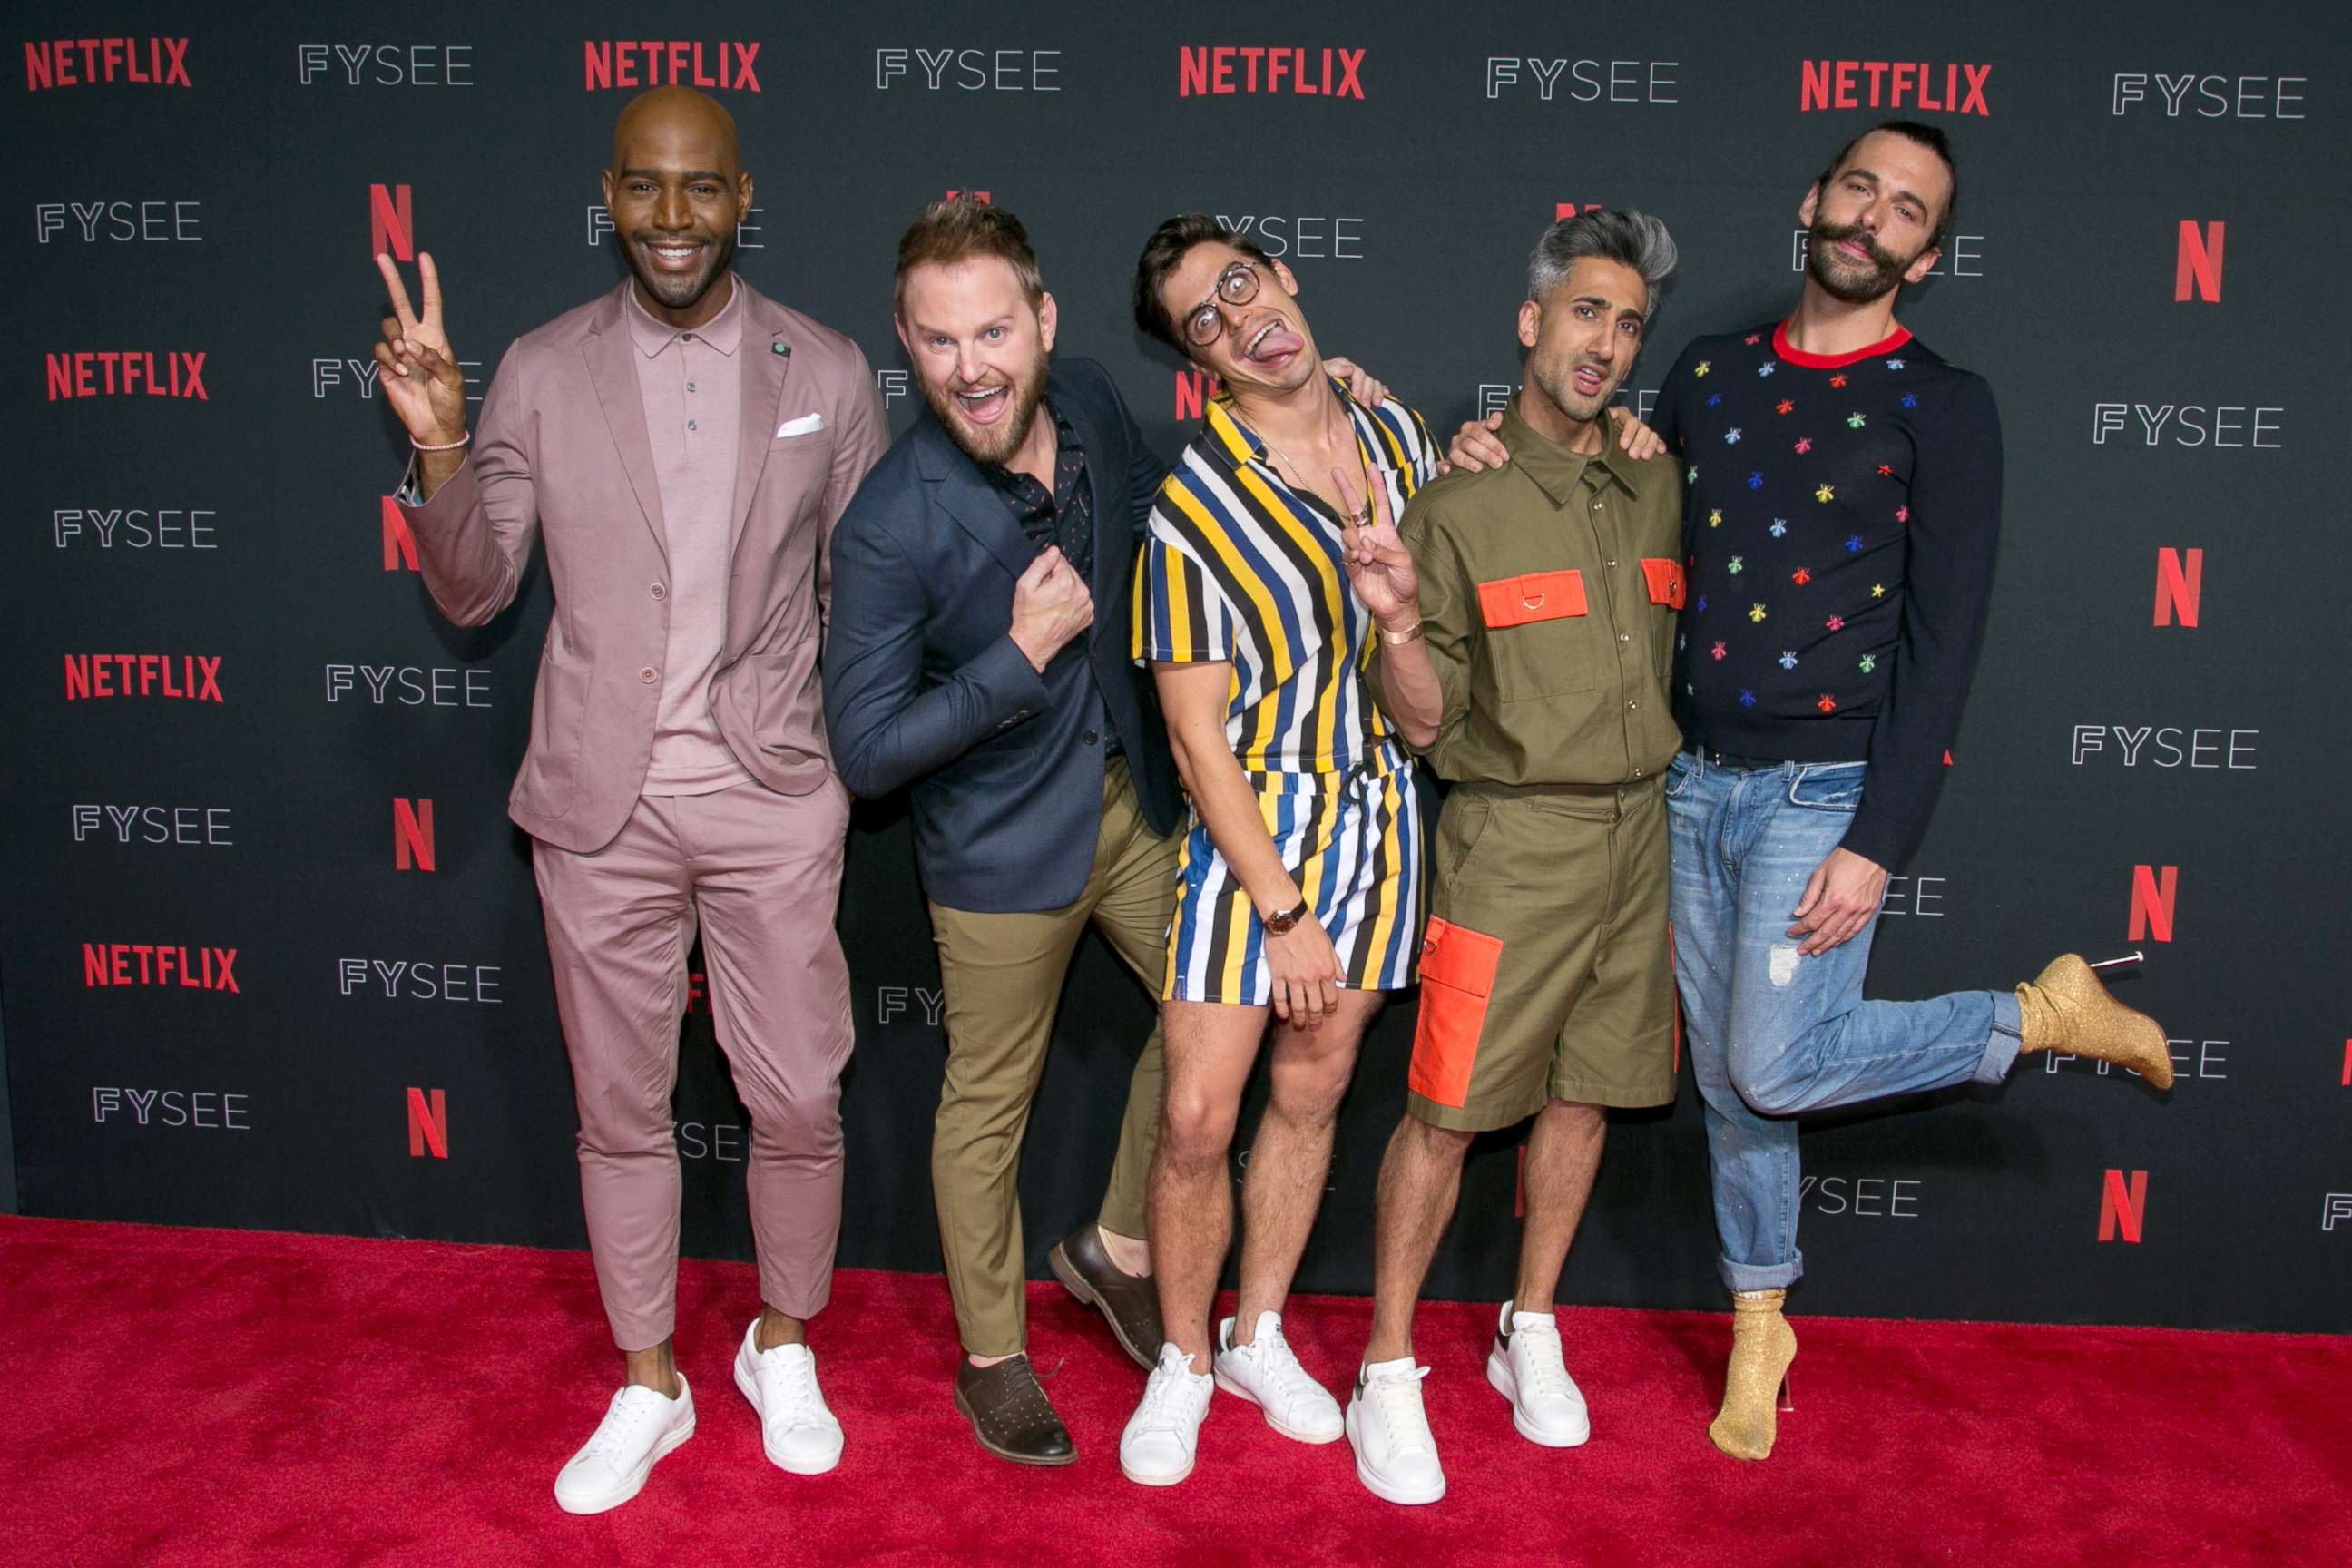 7 life lessons from the Fab 5 of Netflix's 'Queer Eye' - ABC News